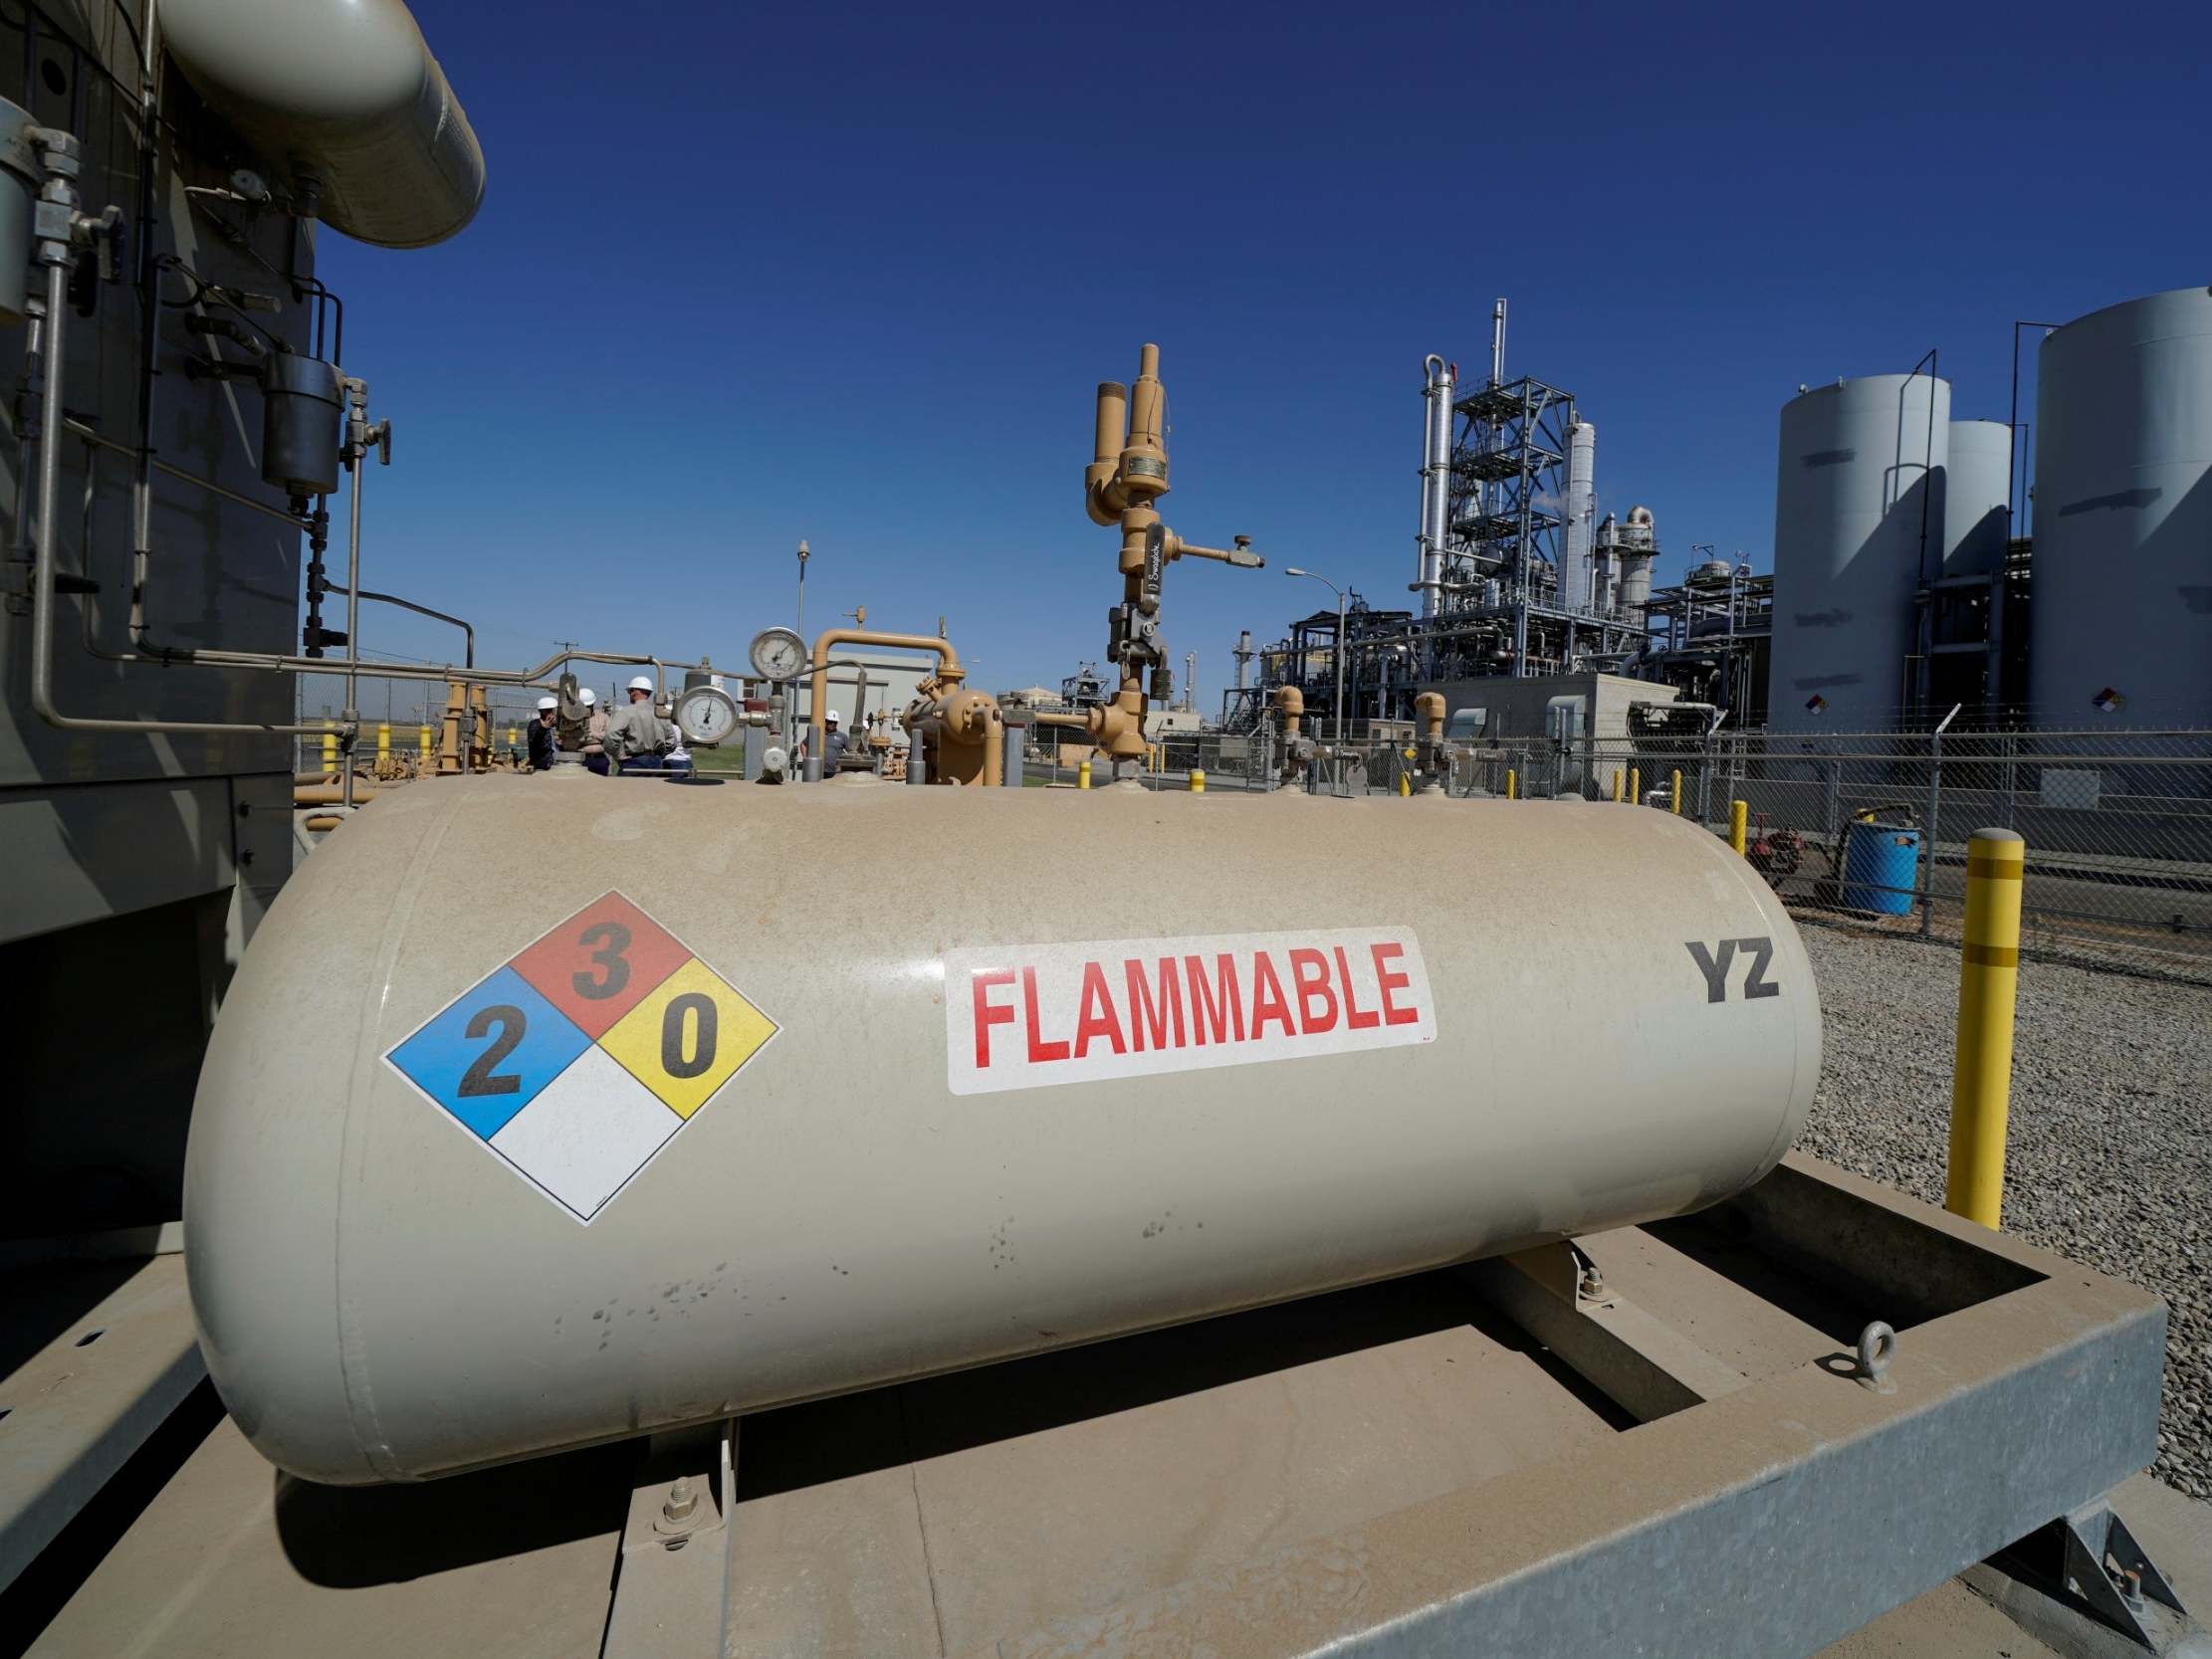 A drilling lobby is attempting to position natural gas as "climate-friendly" to voters